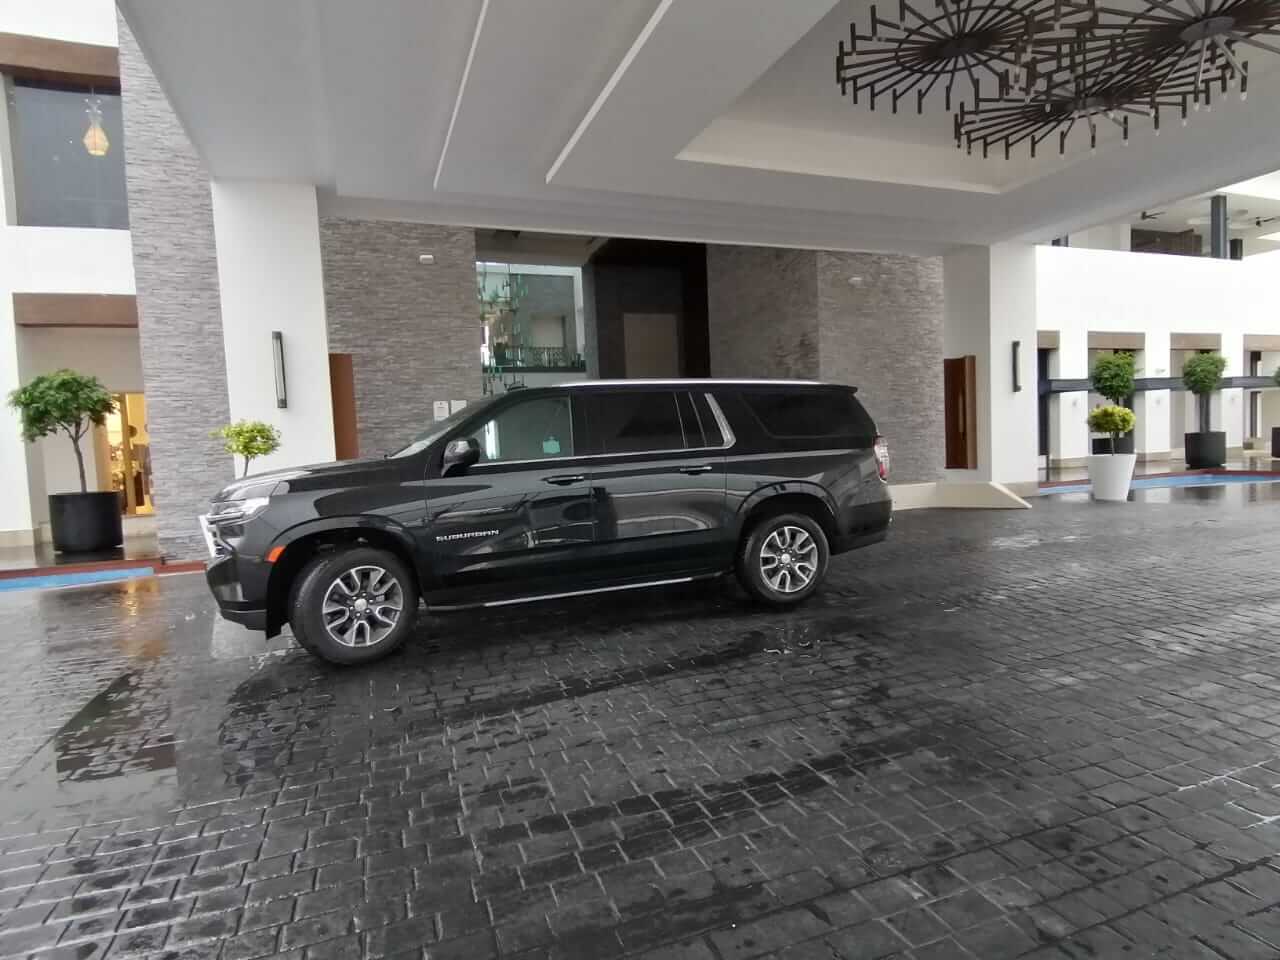 Luxury Black SUV at the entrance of an hotel with chandeliers